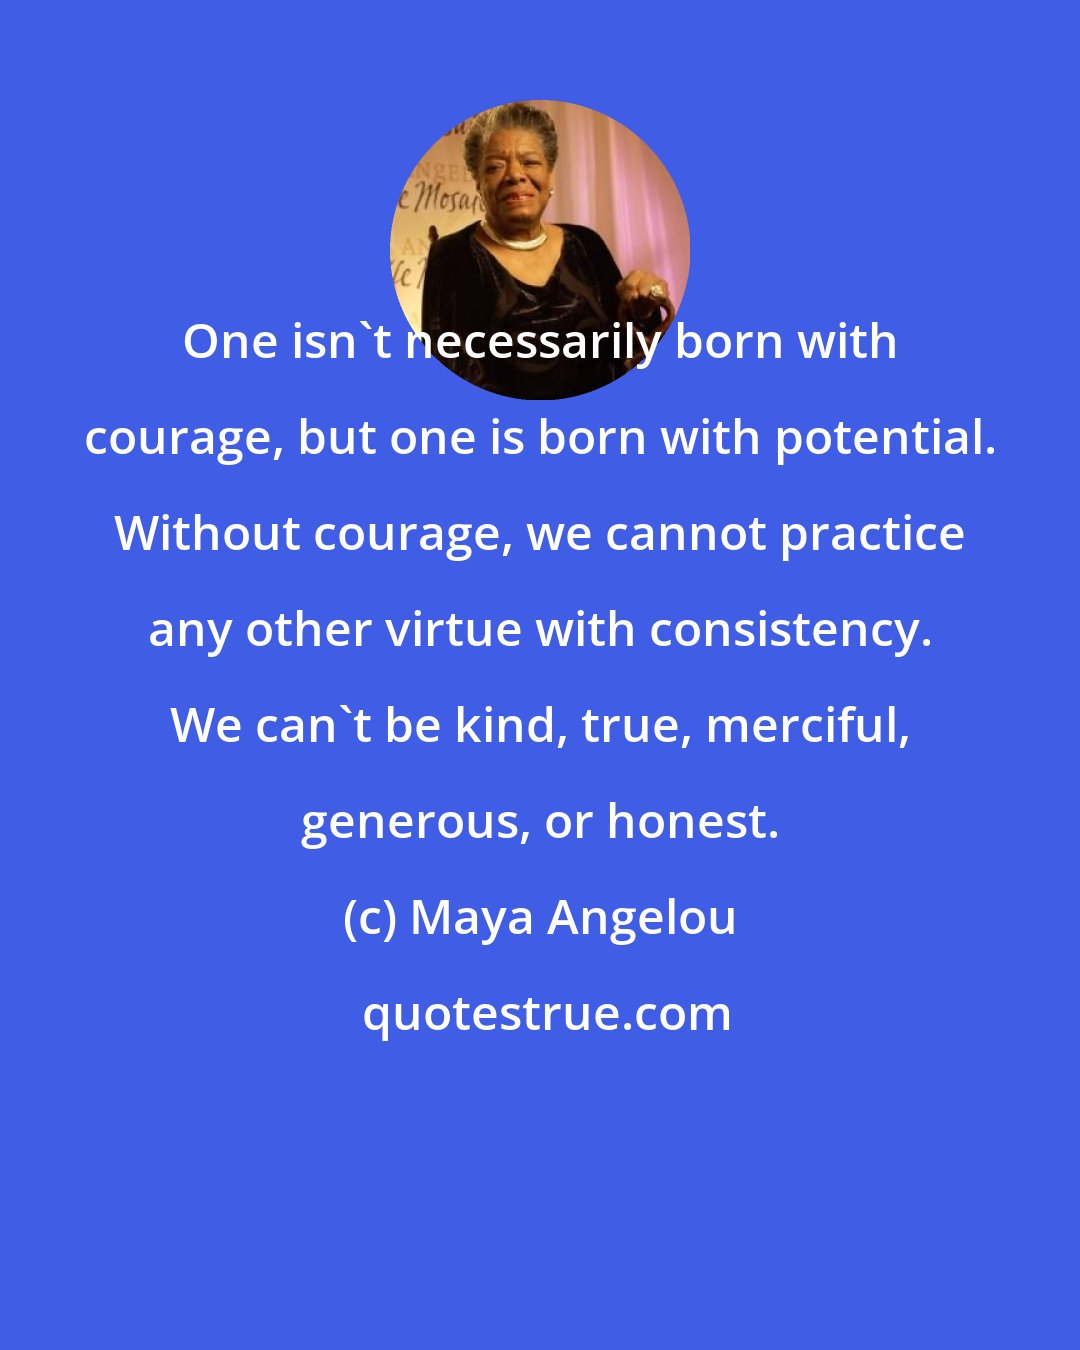 Maya Angelou: One isn't necessarily born with courage, but one is born with potential. Without courage, we cannot practice any other virtue with consistency. We can't be kind, true, merciful, generous, or honest.